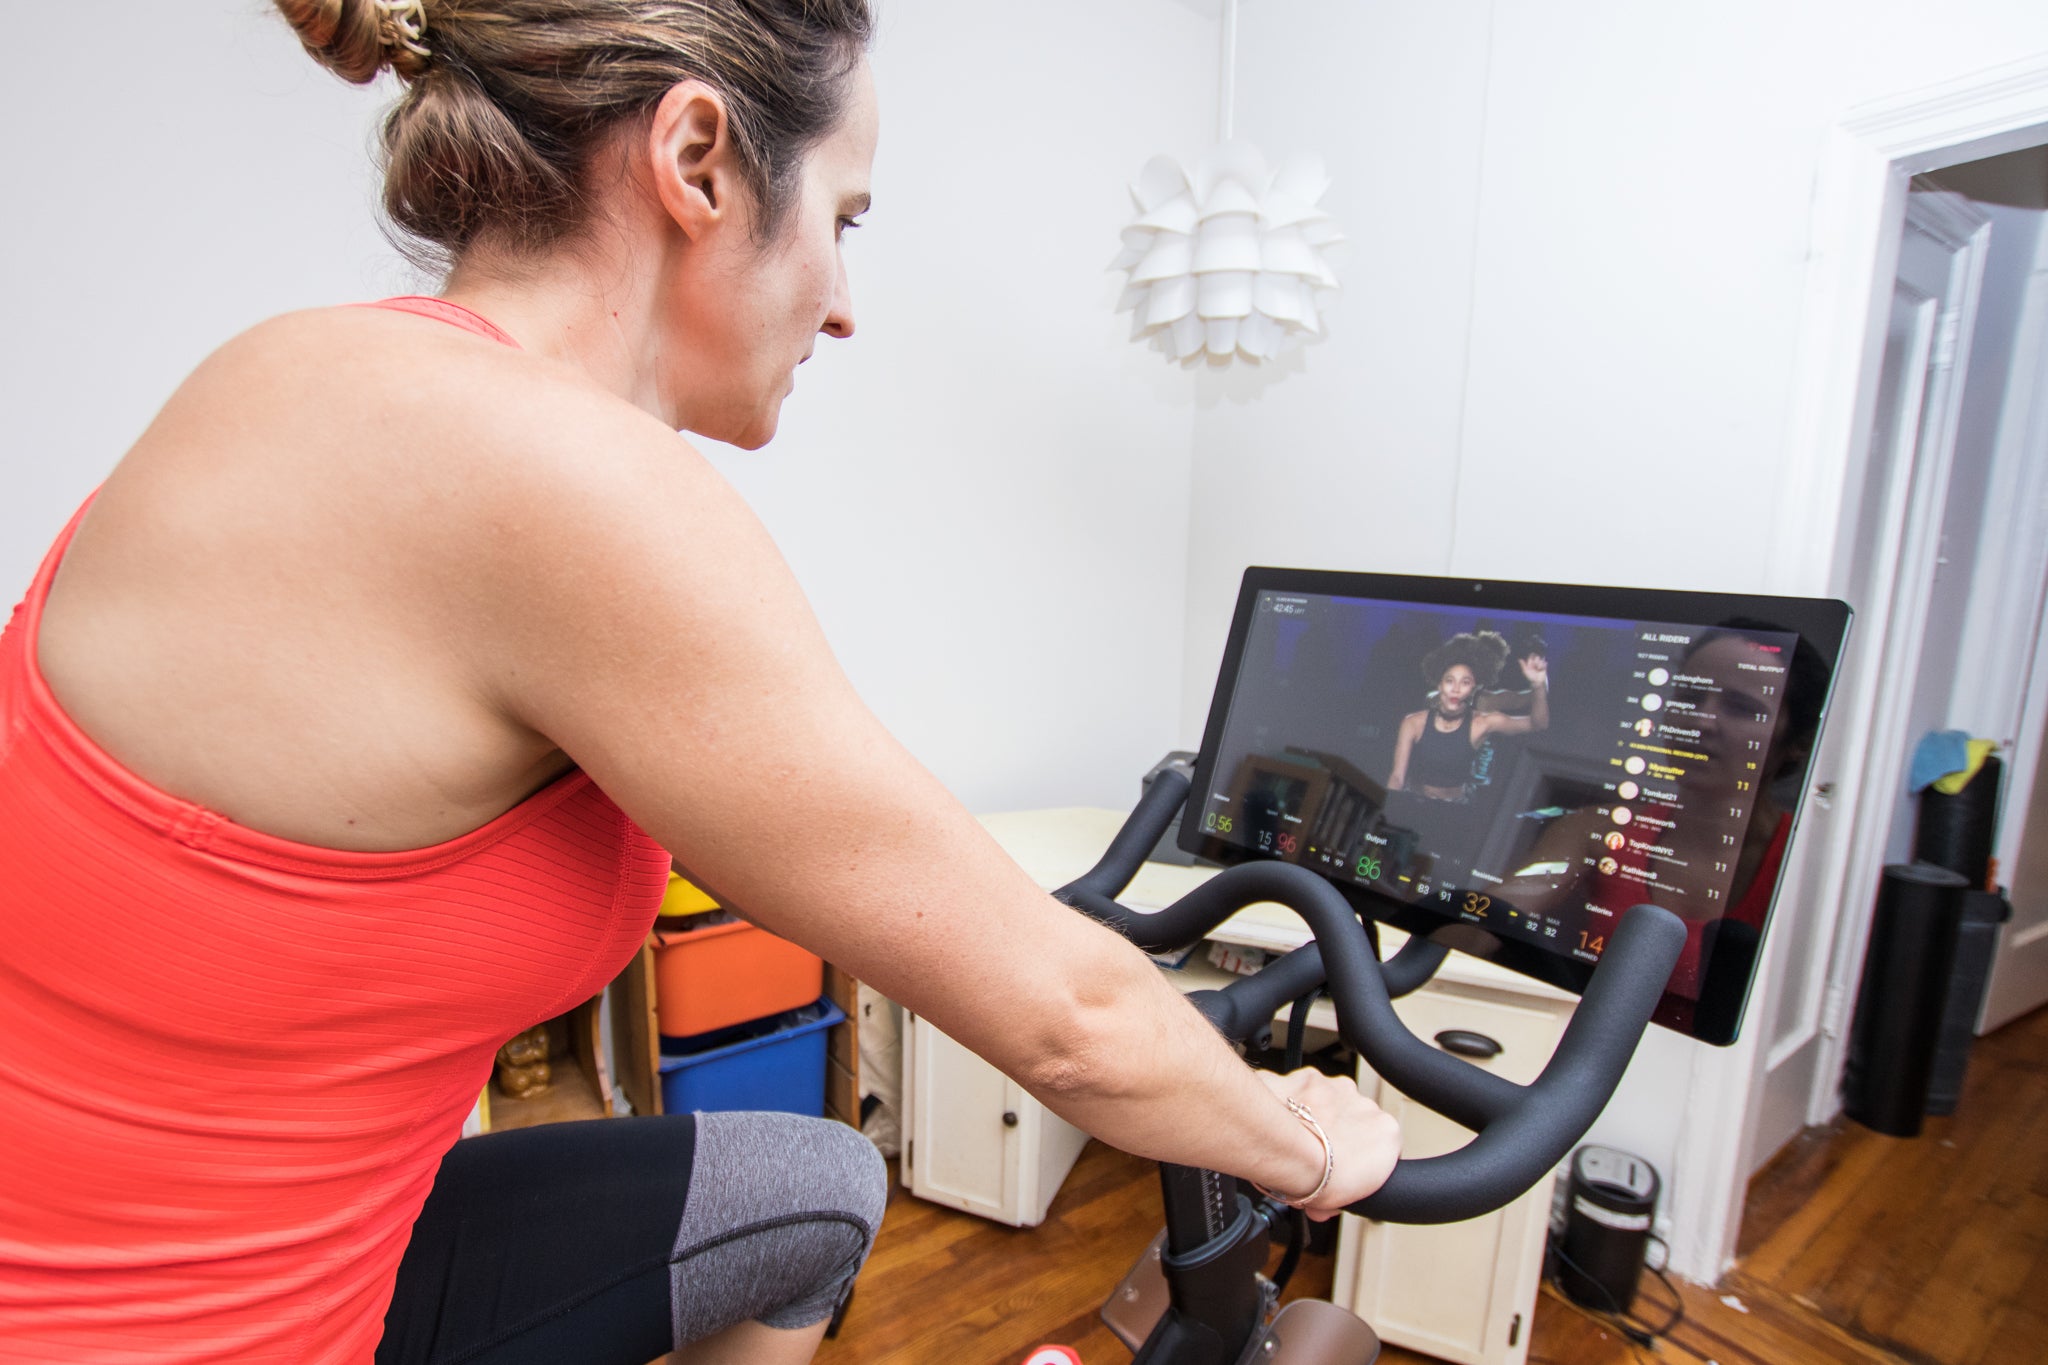 How To Watch Youtube On Peloton Without Subscription